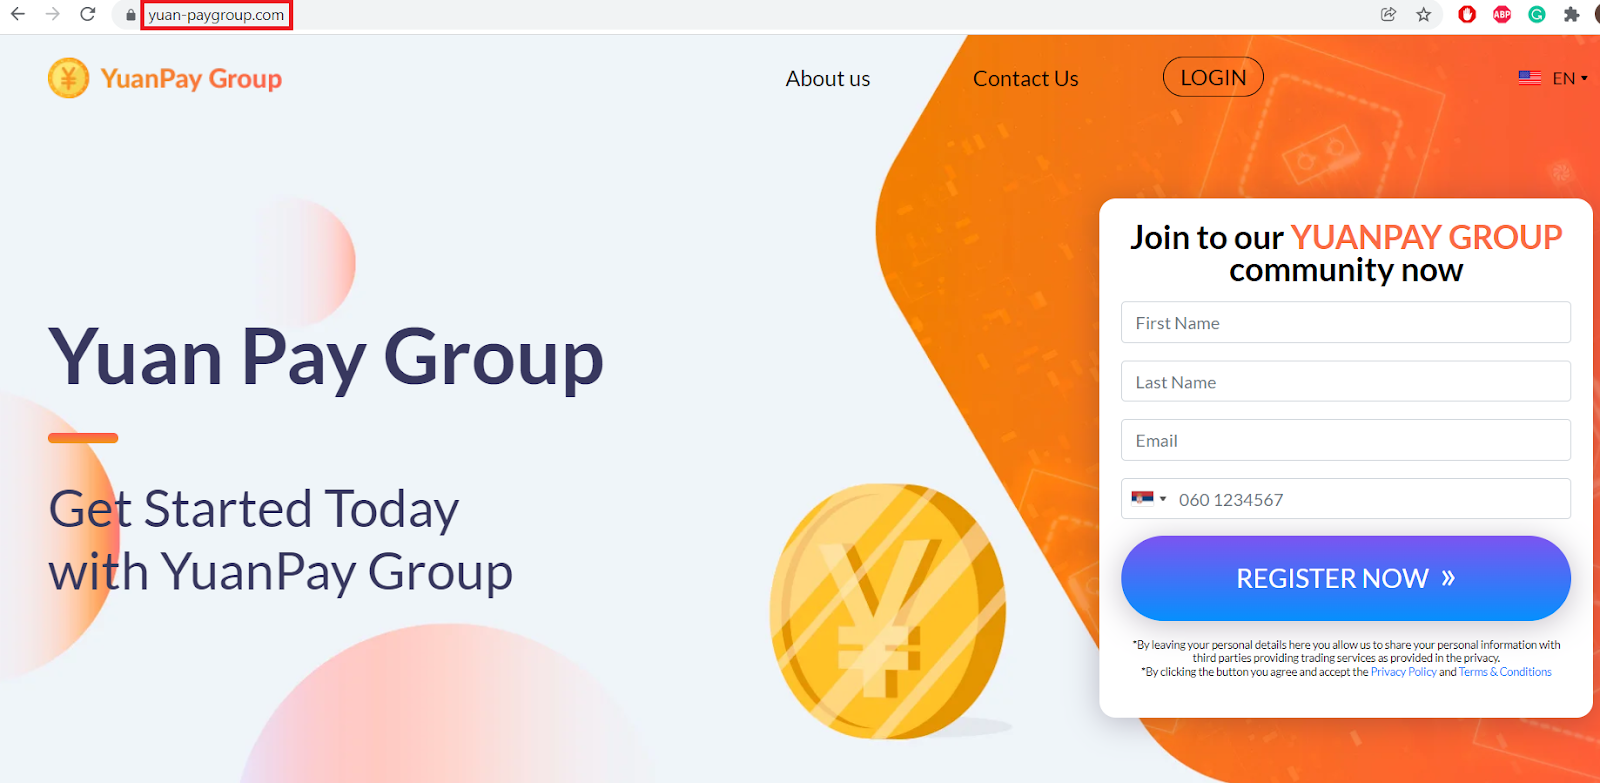 YuanPay Group website layout